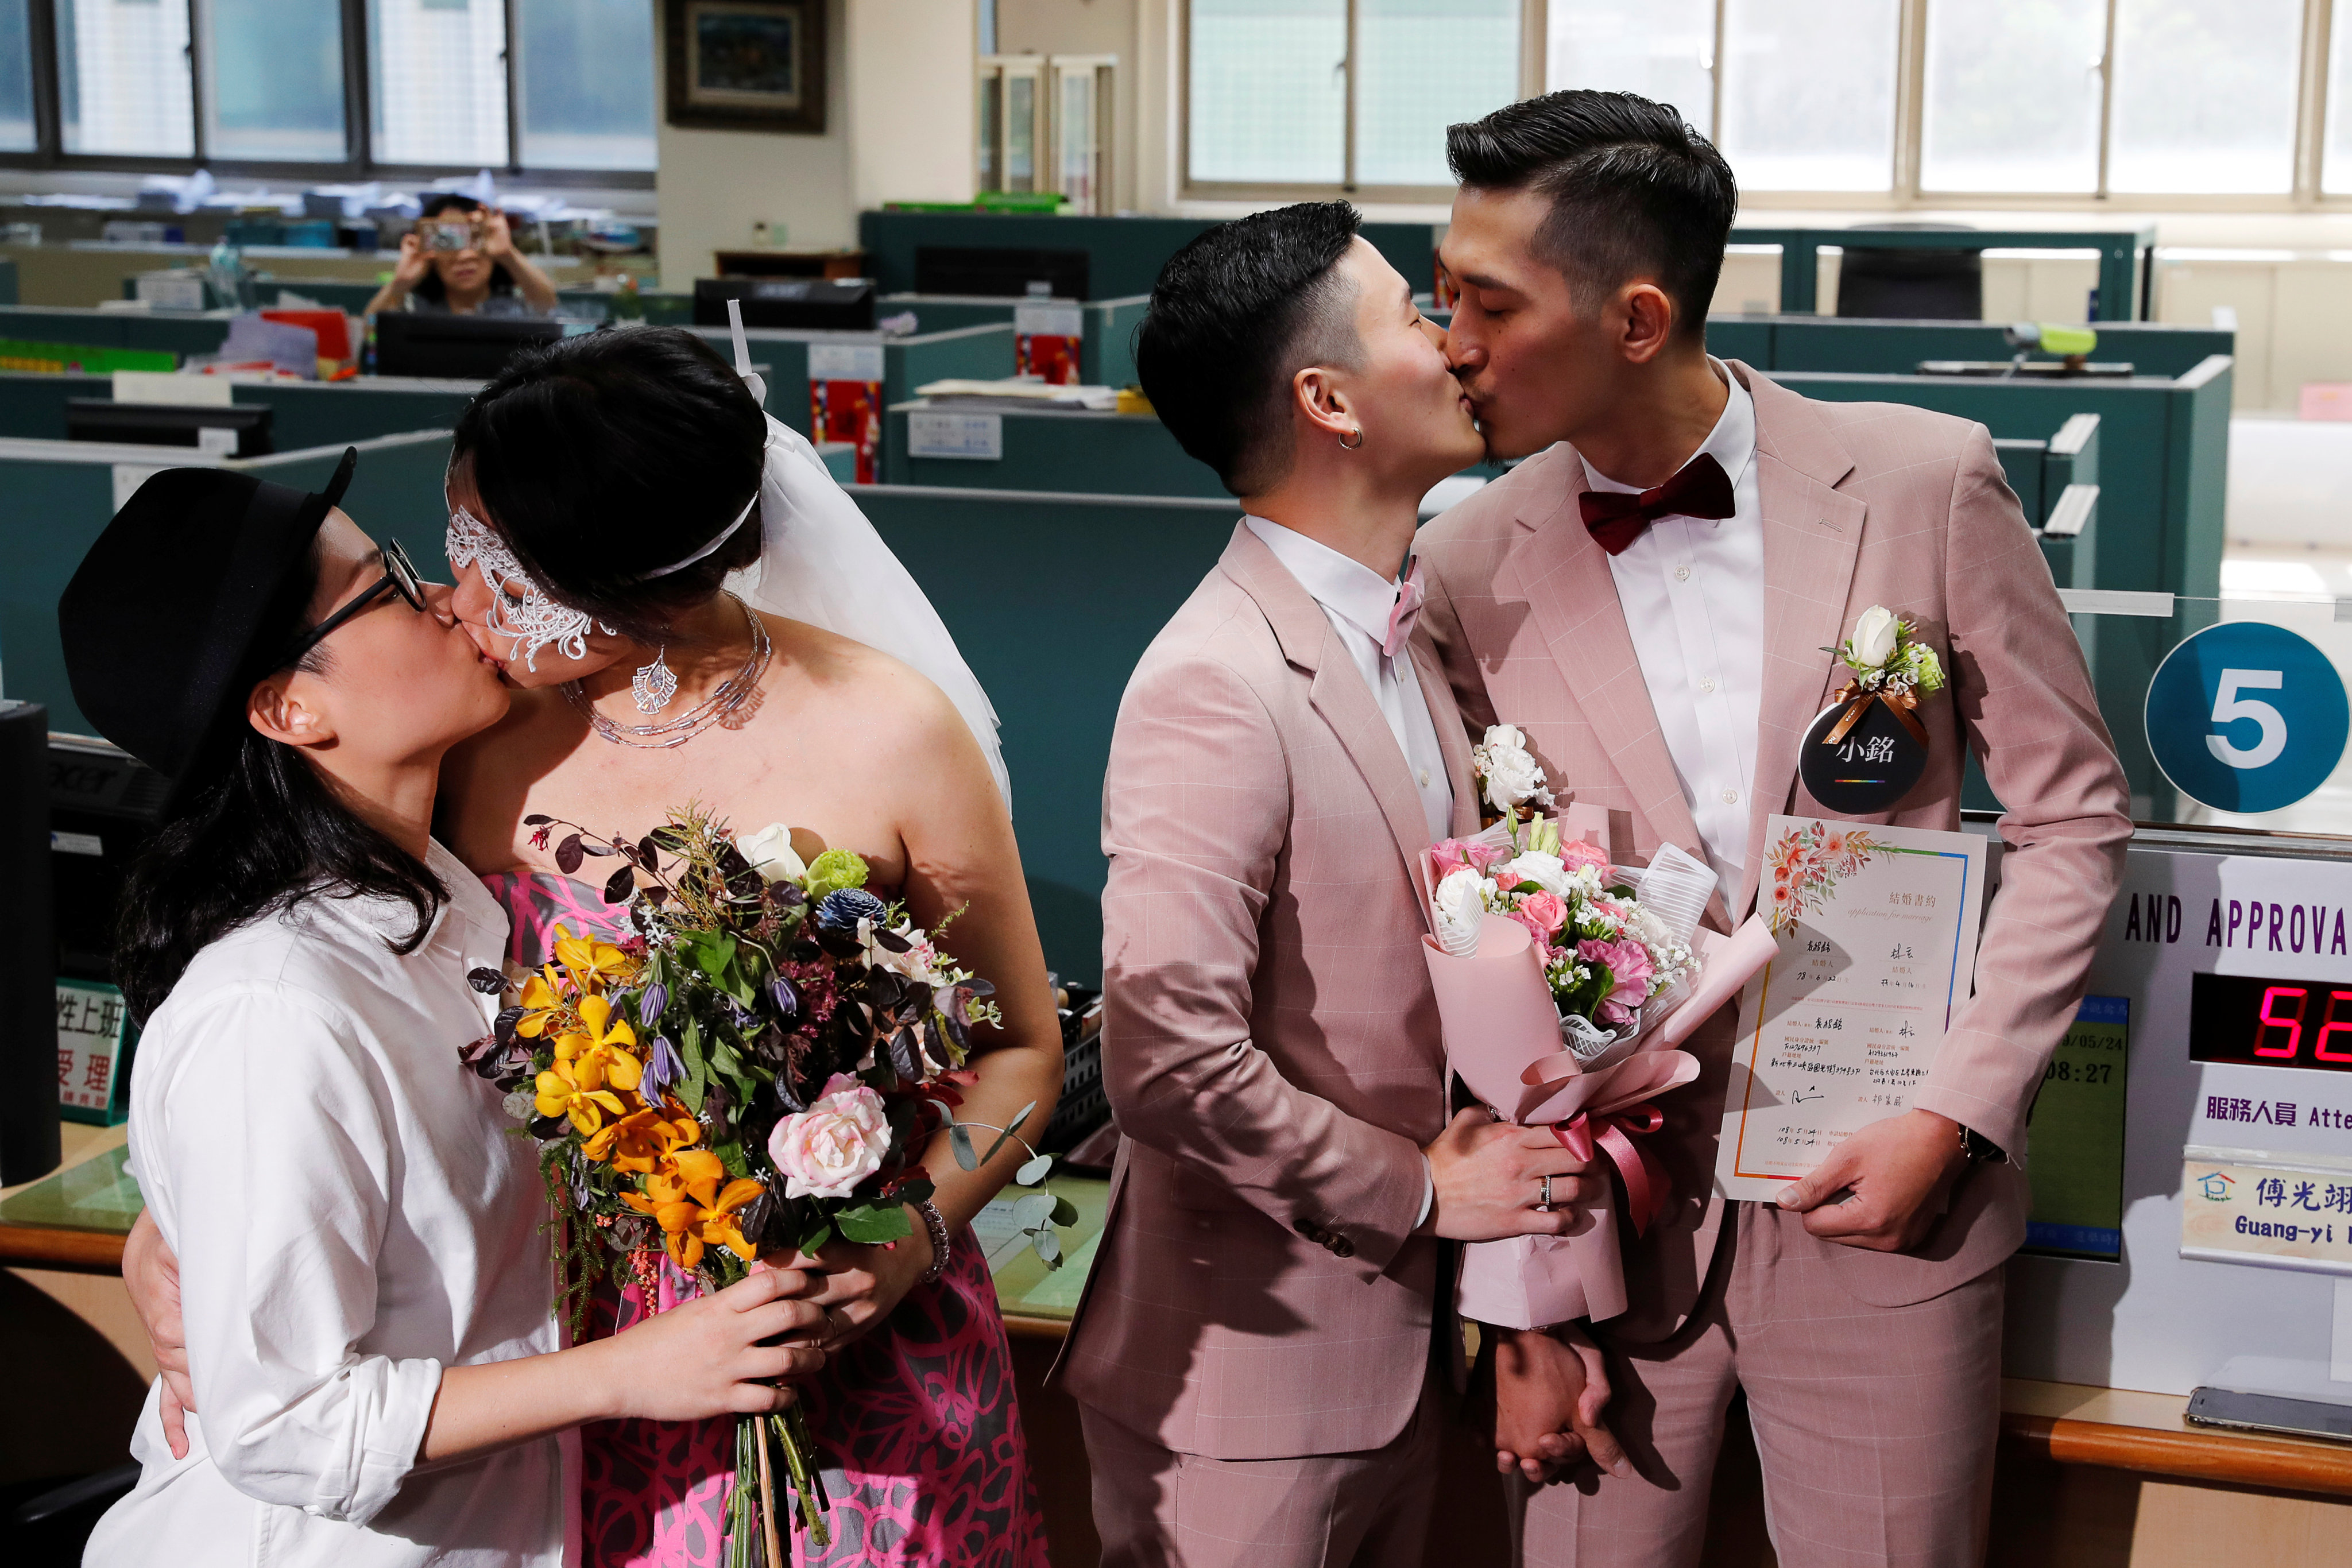 Couples Shane Lin (right) and Marc Yuan, and Cynical Chick (left) and Li Ying-Chien, kiss after registering for marriage at the Household Registration Office in Taipei, Taiwan on May 24, 2019. Photo: Reuters